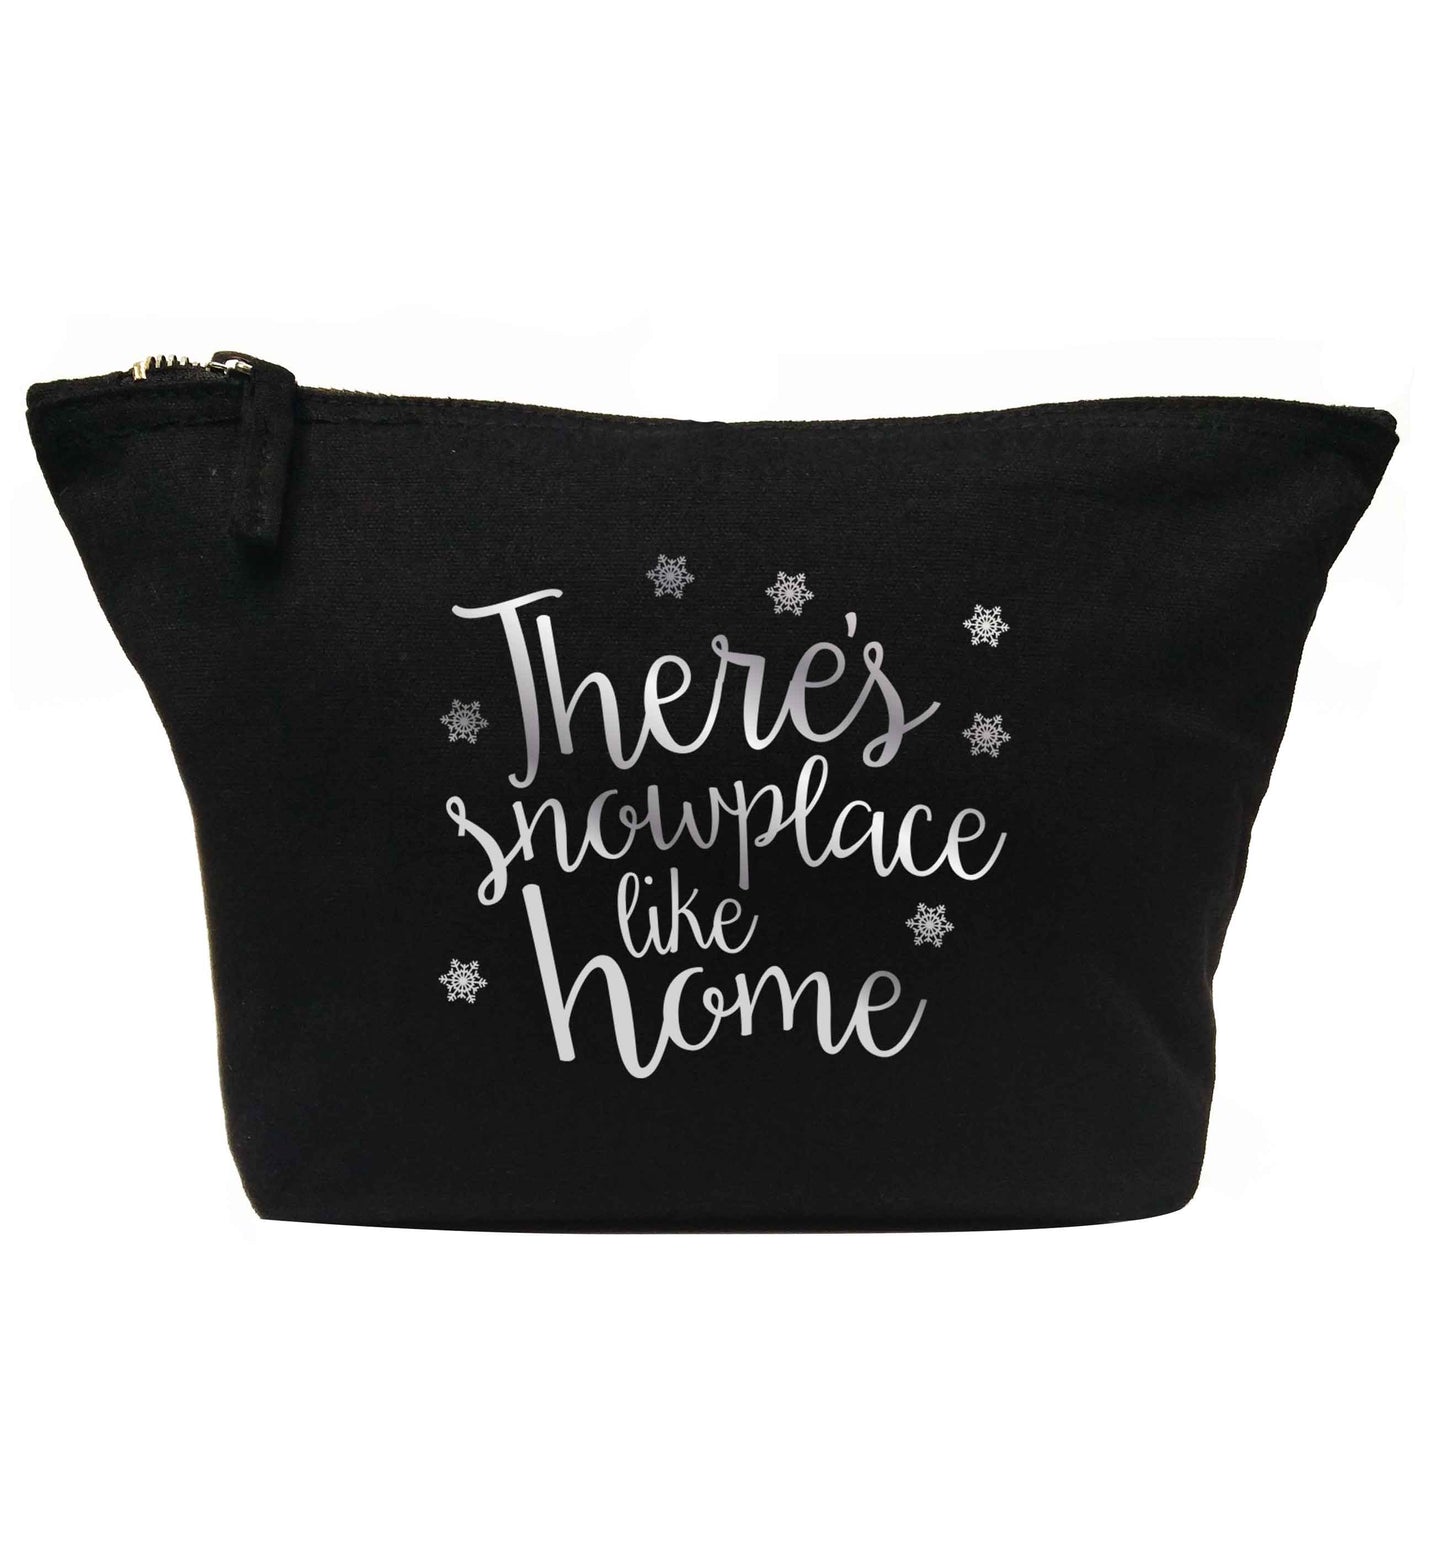 There's snowplace like home - metallic silver | Makeup / wash bag